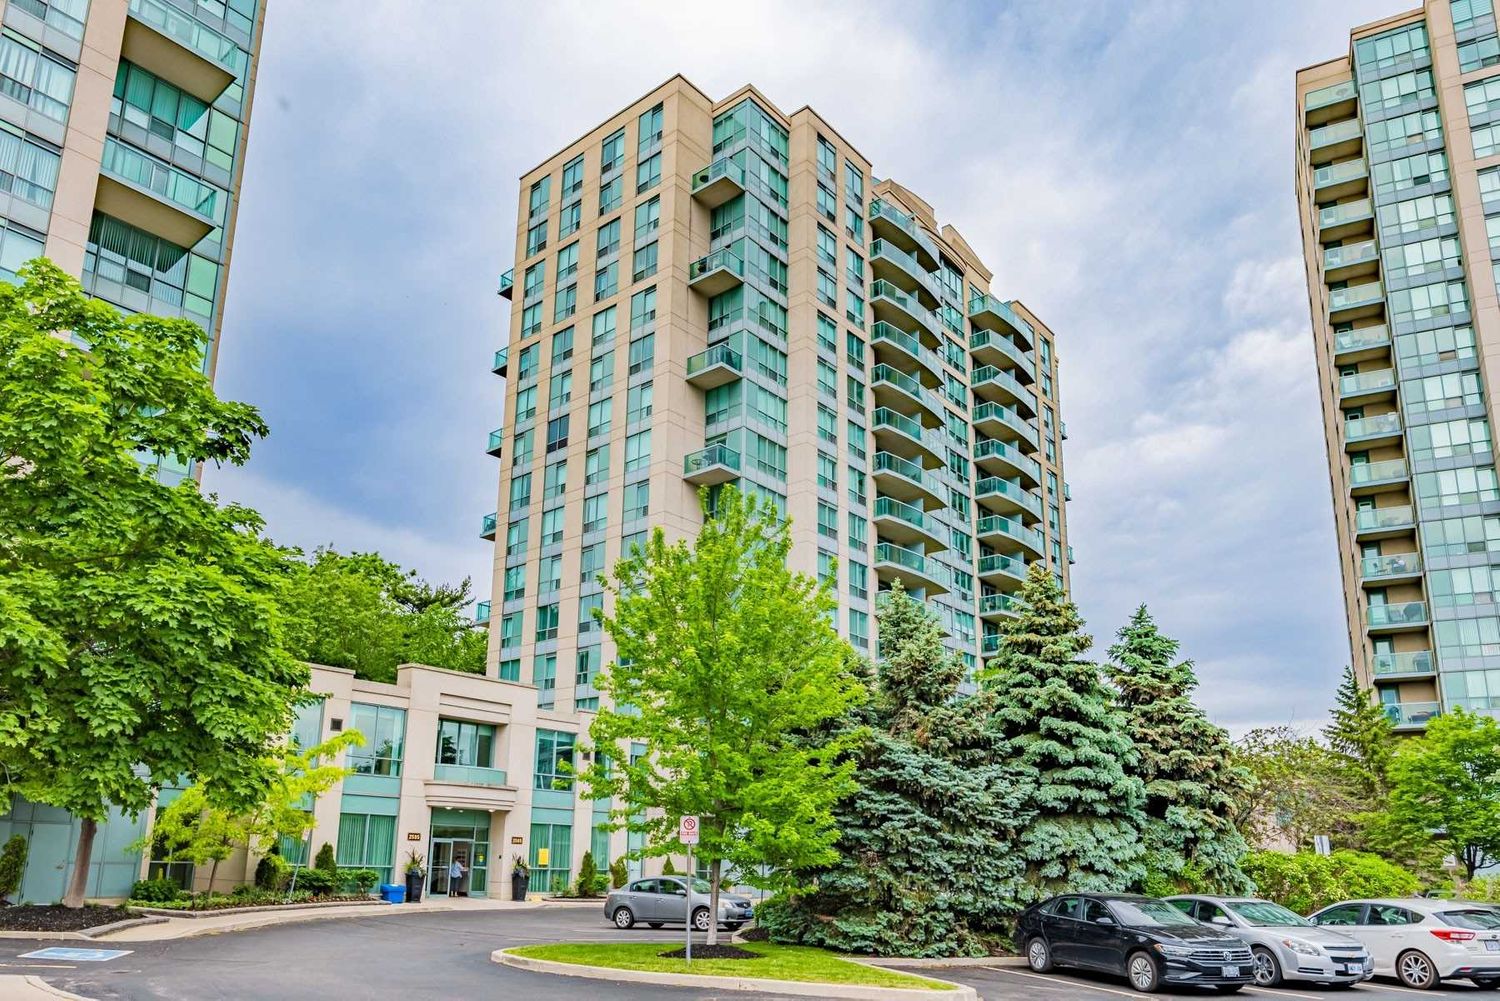 2565 Erin Centre Boulevard. Parkway Place II Condos is located in  Mississauga, Toronto - image #1 of 2